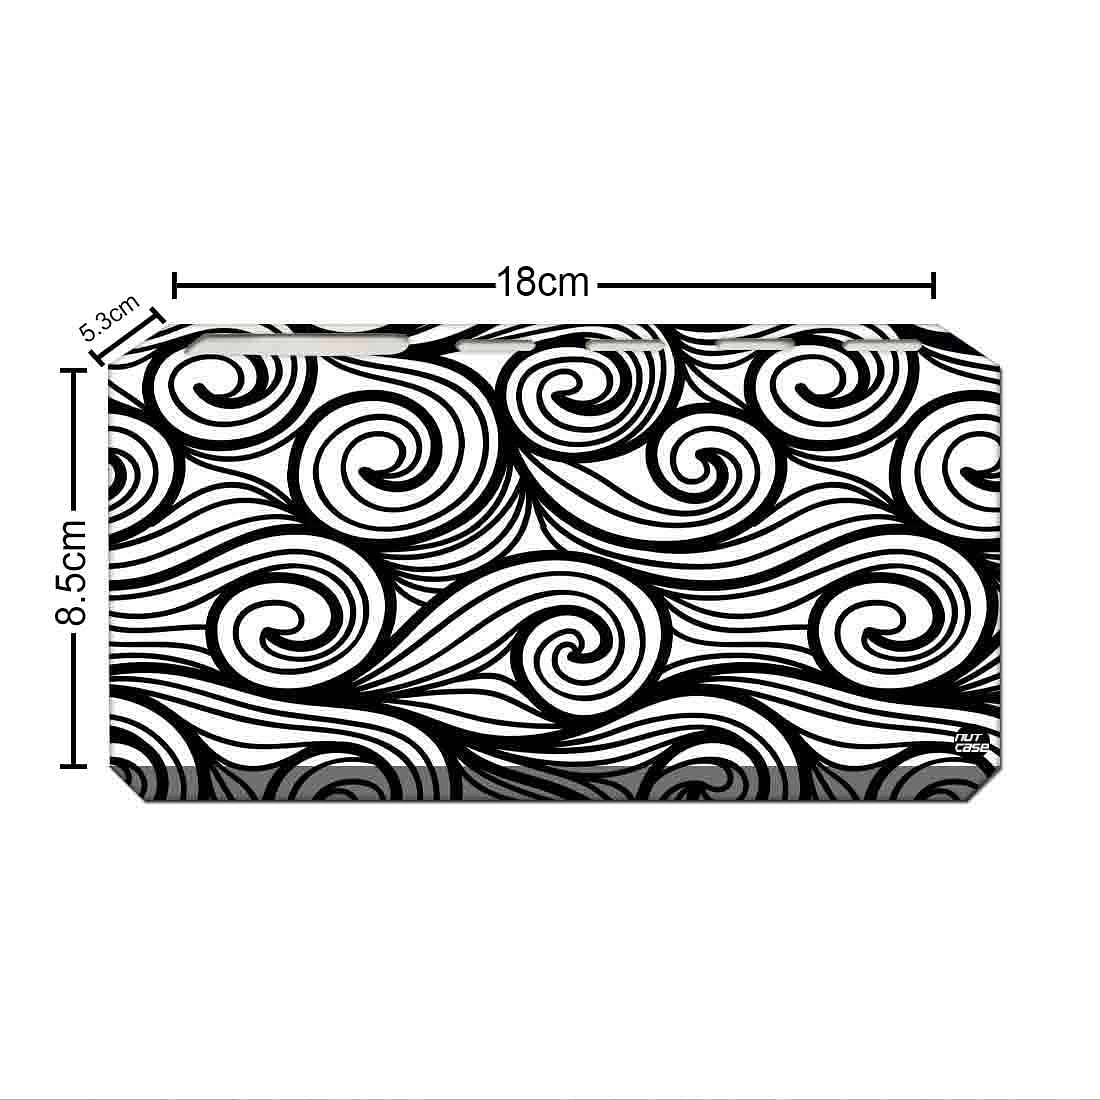 Toothbrush Organizer for Wall with Waves Pattern Printed Nutcase